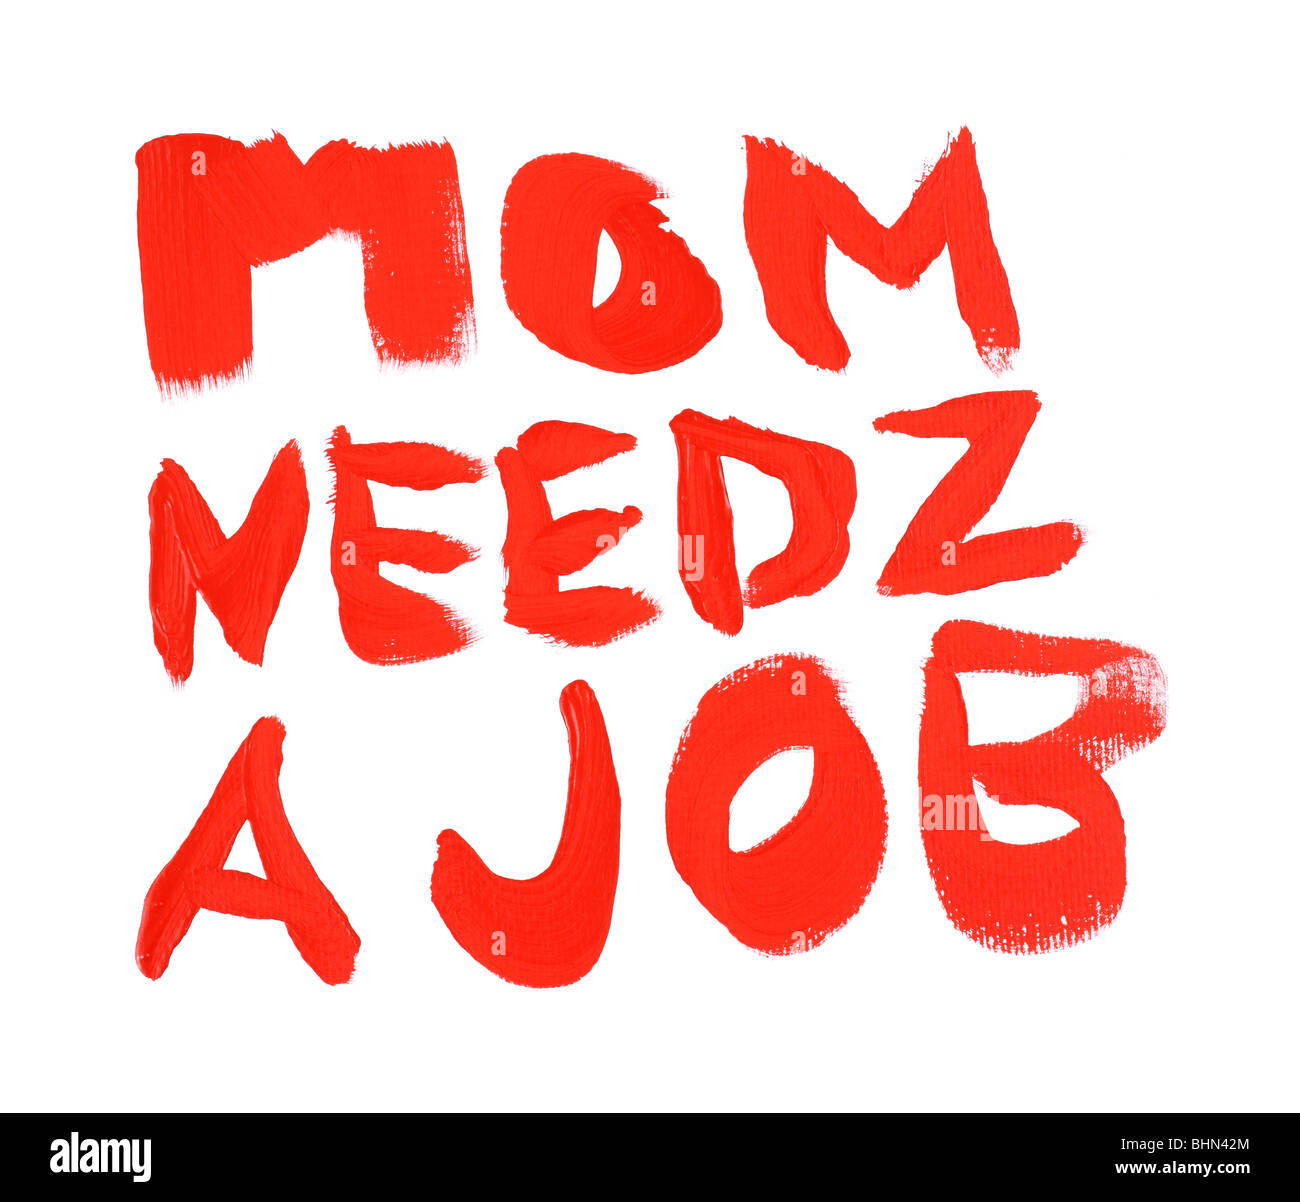 Mom needs a job sign painting Stock Photo